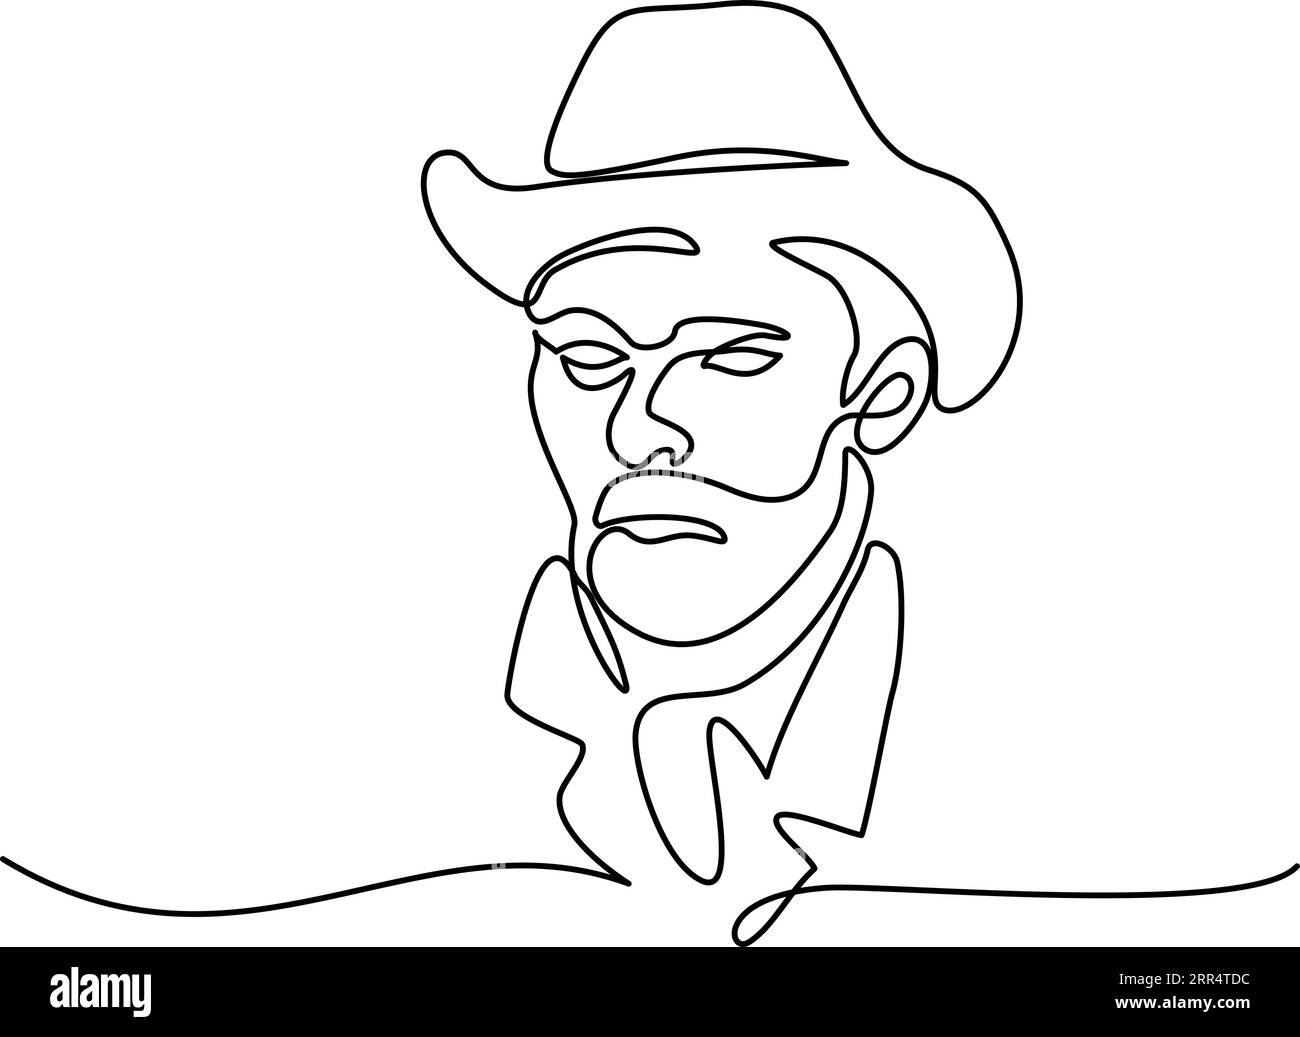 Van Gogh man in hat. Continuous one line art drawing style. Minimalist black linear sketch isolated on white background. Vector illustration Stock Vector